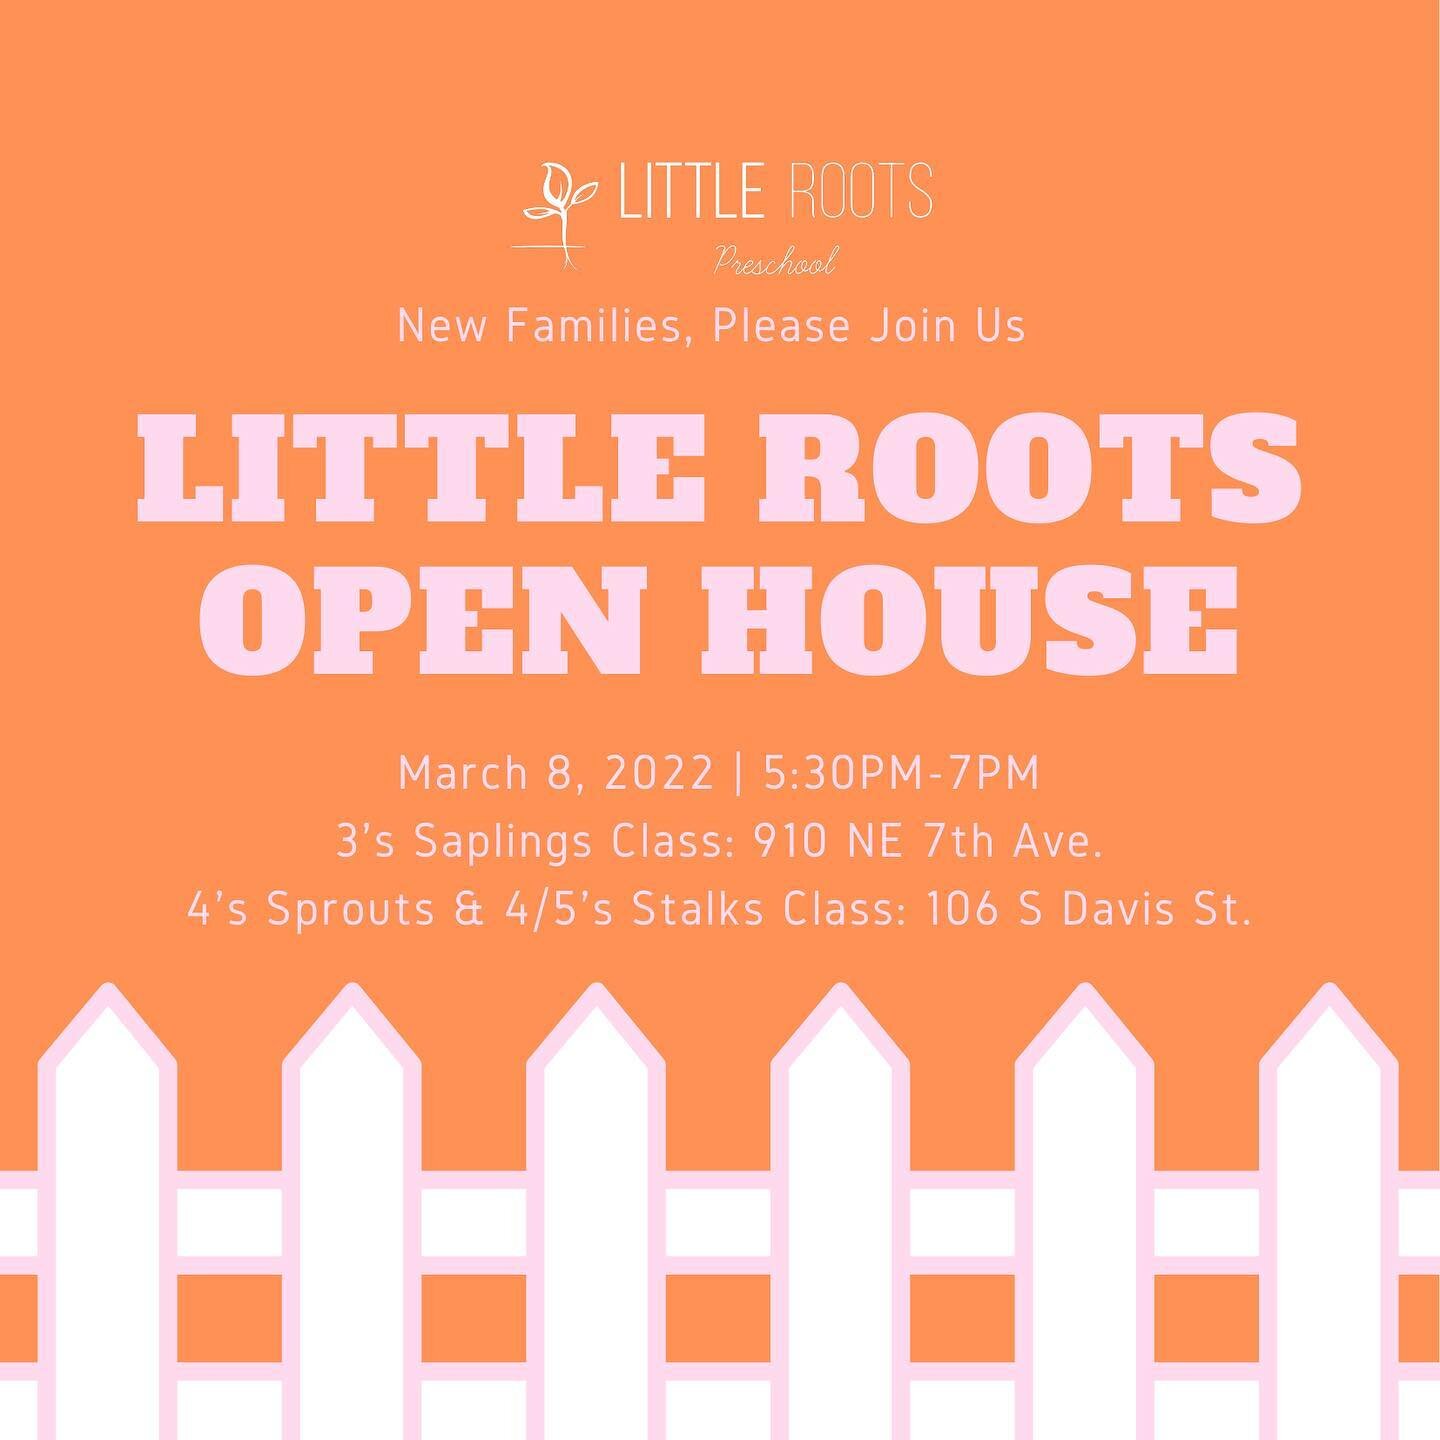 New Little Roots families, please join us for our Open House on Tuesday, March 8th to meet our teachers and see the school! 🏠🍎✏️⁣⁣⁣
⁣⁣⁣
We are looking forward to meeting you all 🤍